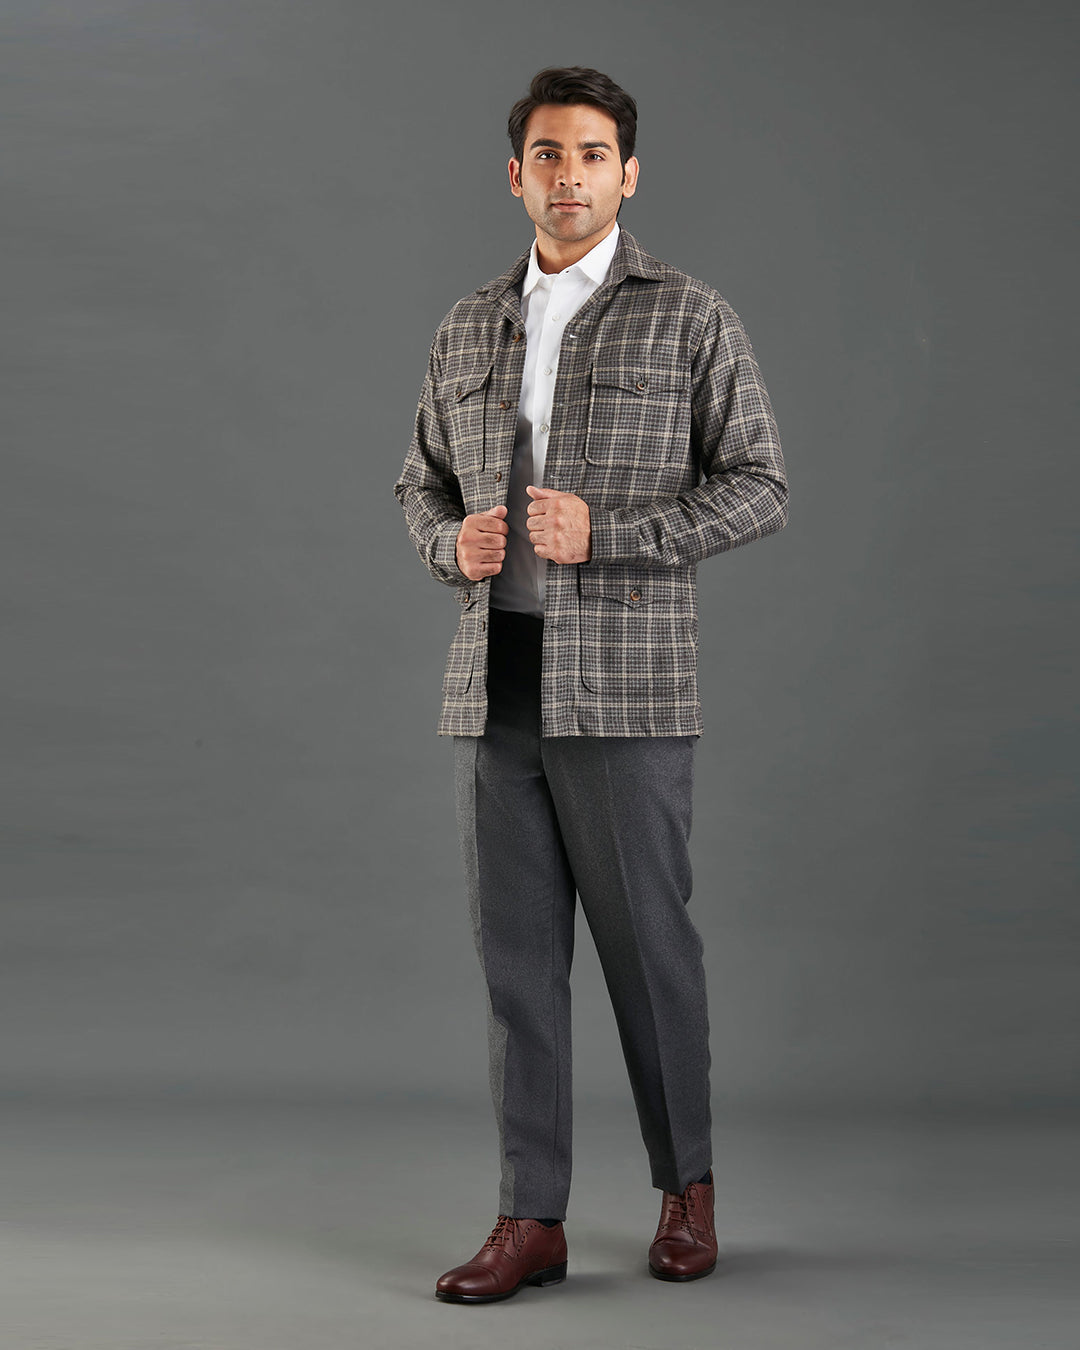 Front of model wearing the shirt jacket for men by Luxire in brown and grey overchecks hands together